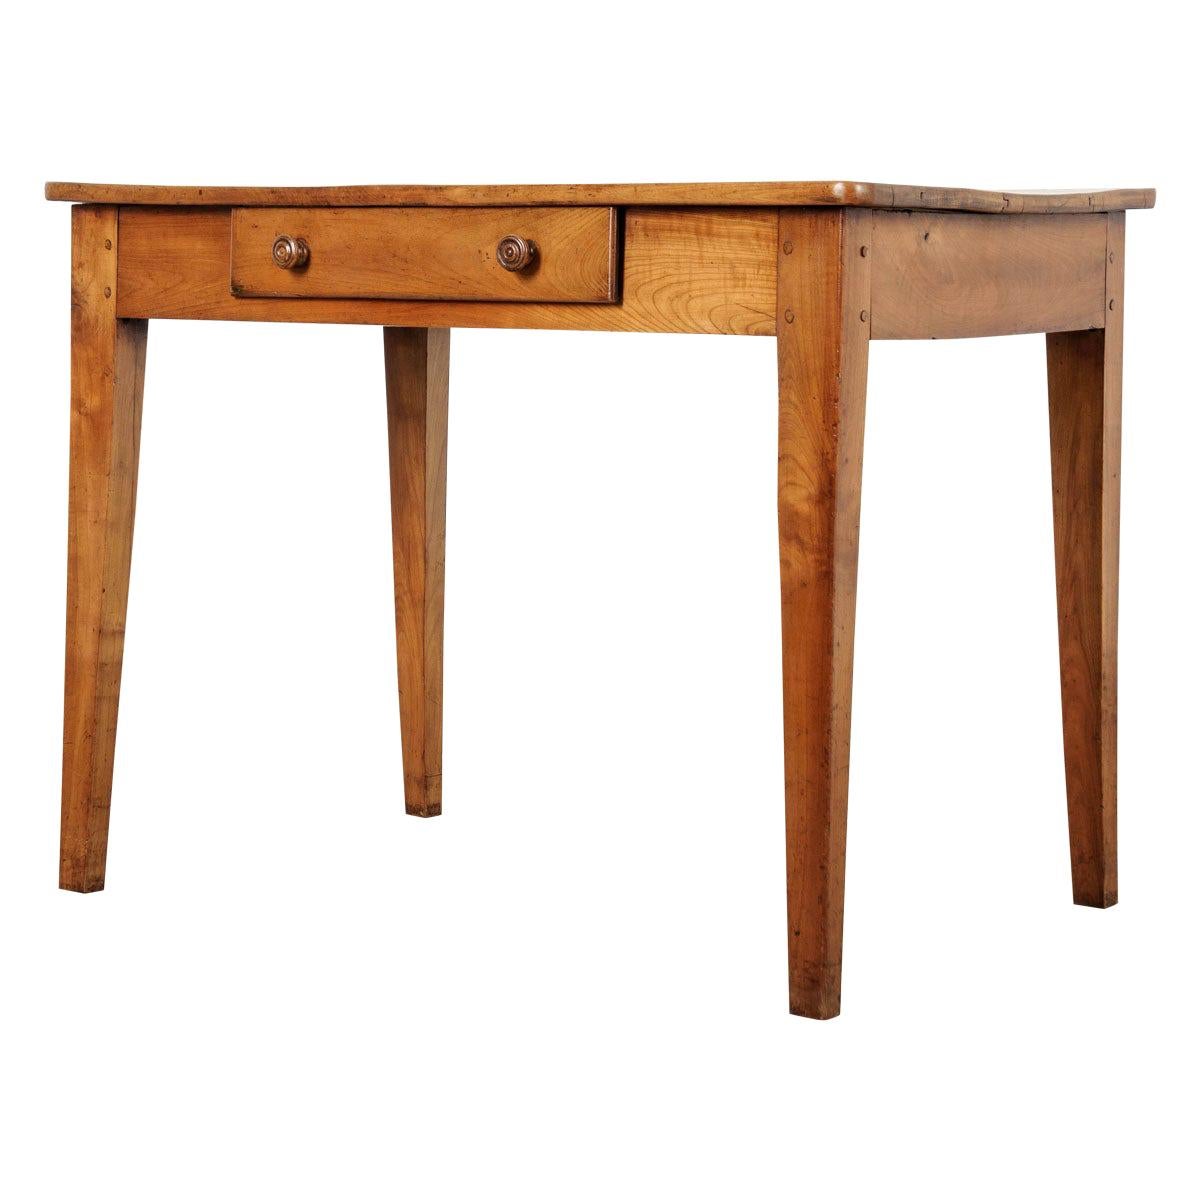 French 19th Century Fruitwood Desk Writing Table